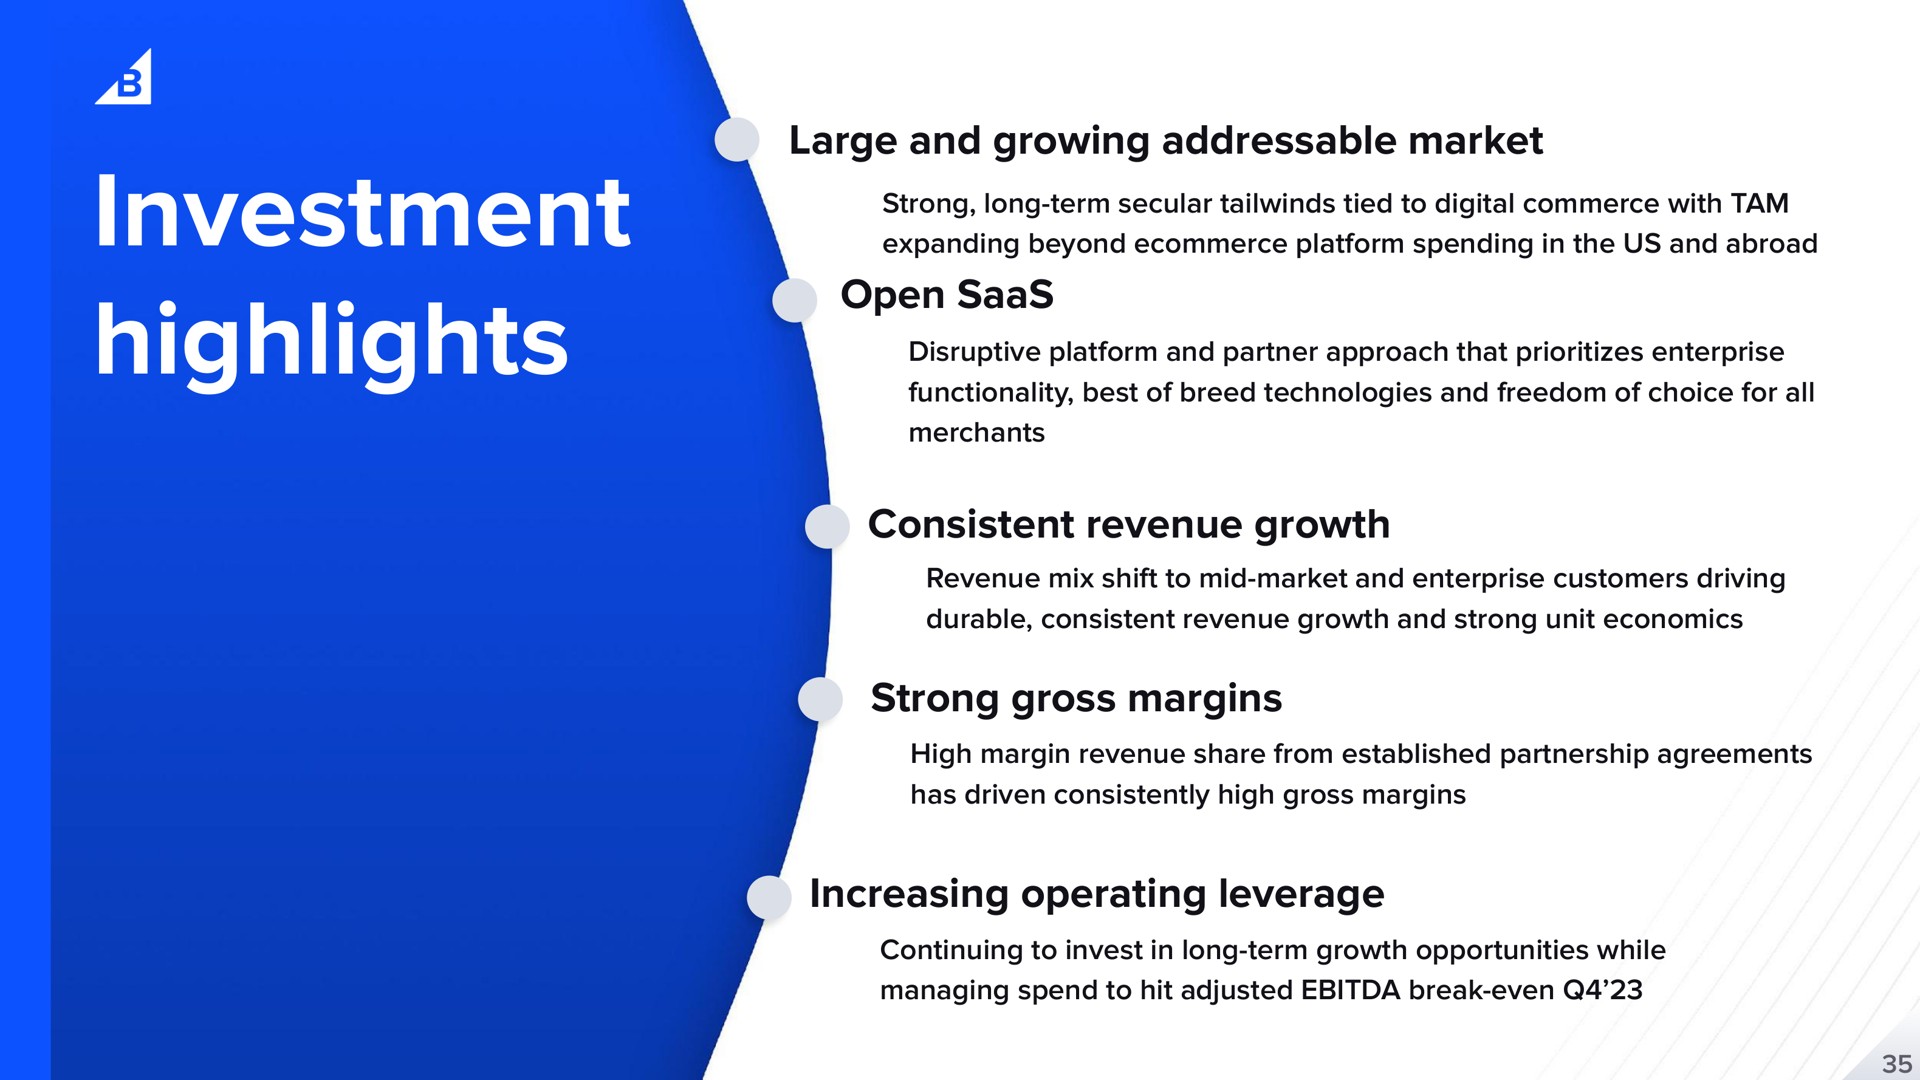 investment highlights large and growing market open consistent revenue growth strong gross margins increasing operating leverage highlight cane | BigCommerce